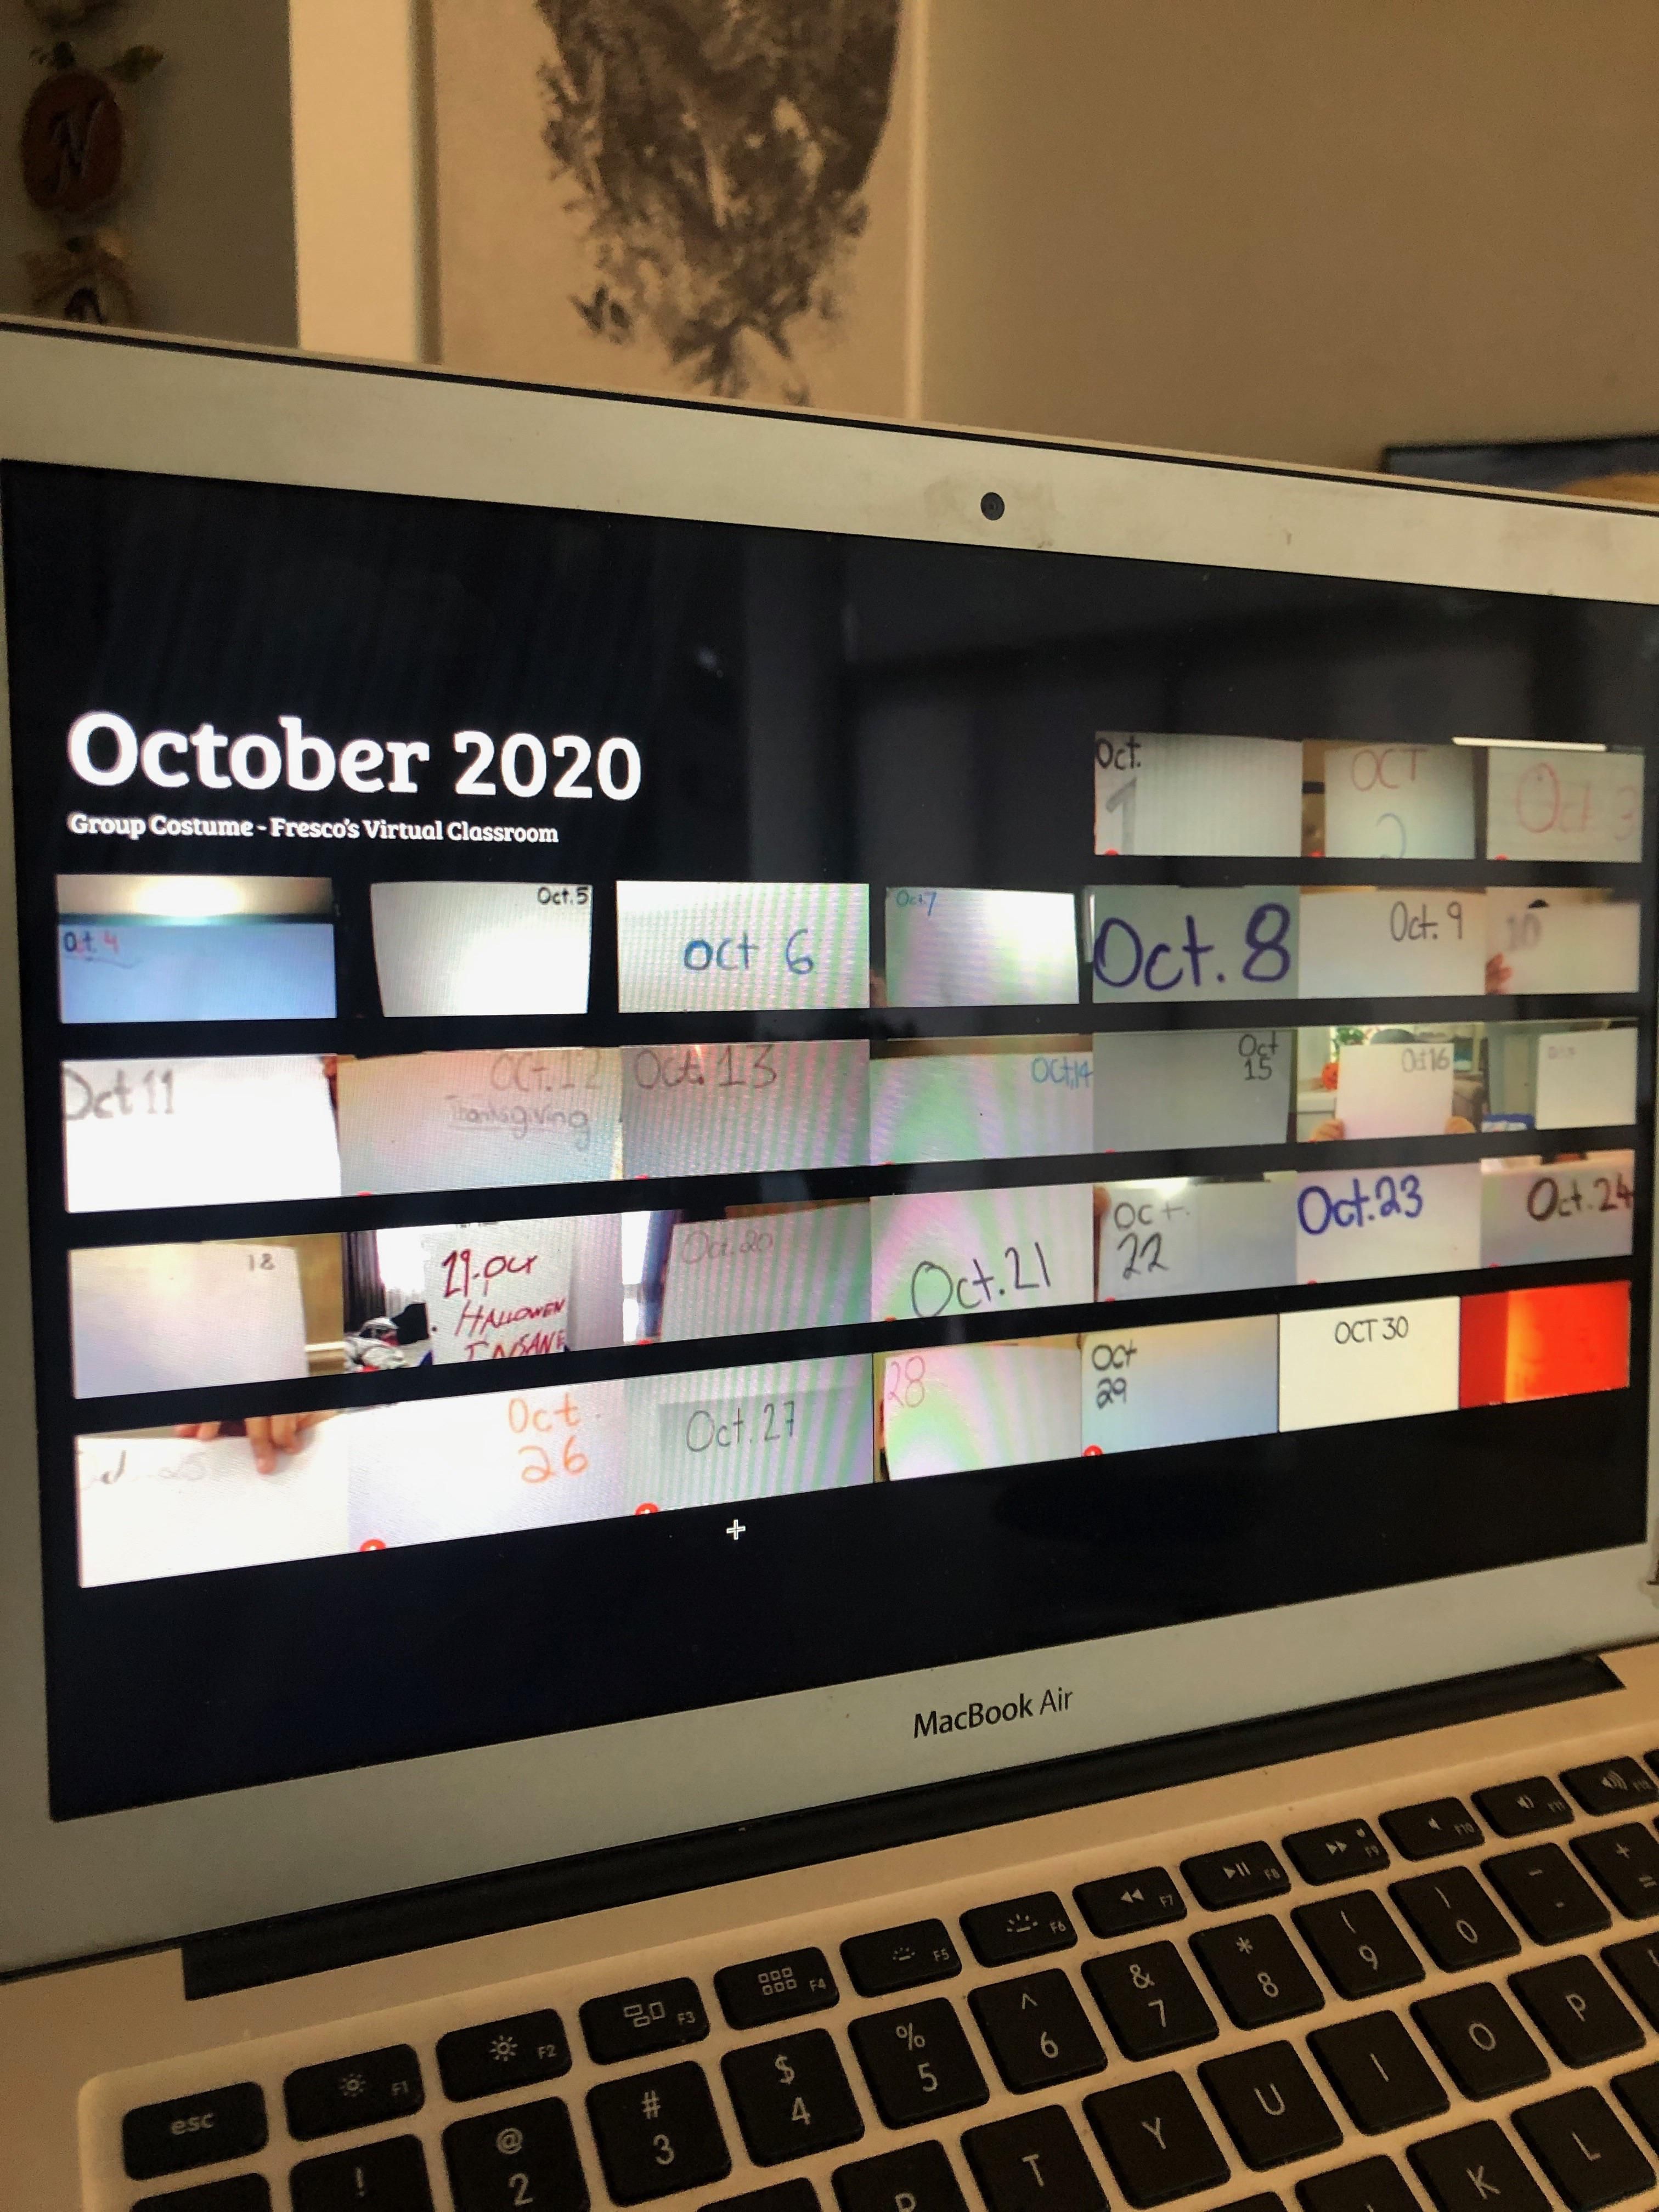 My sister teaches online so her class dressed up as a calendar for Halloween.